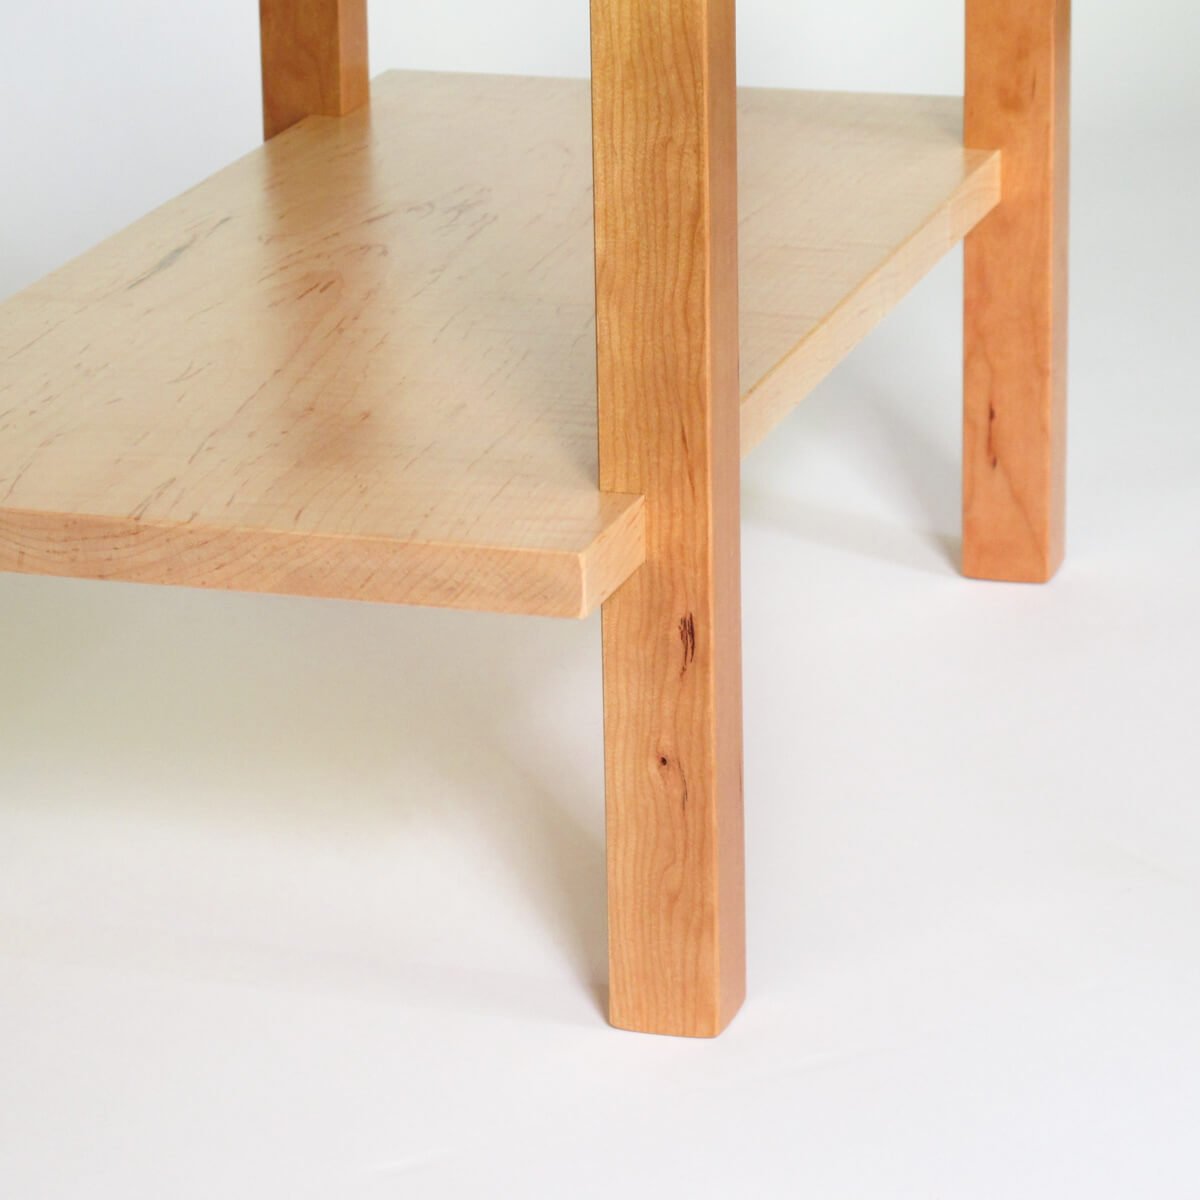 hand-cut joinery details on entry bench with shelf for shoe storage by Mokuzai Furniture